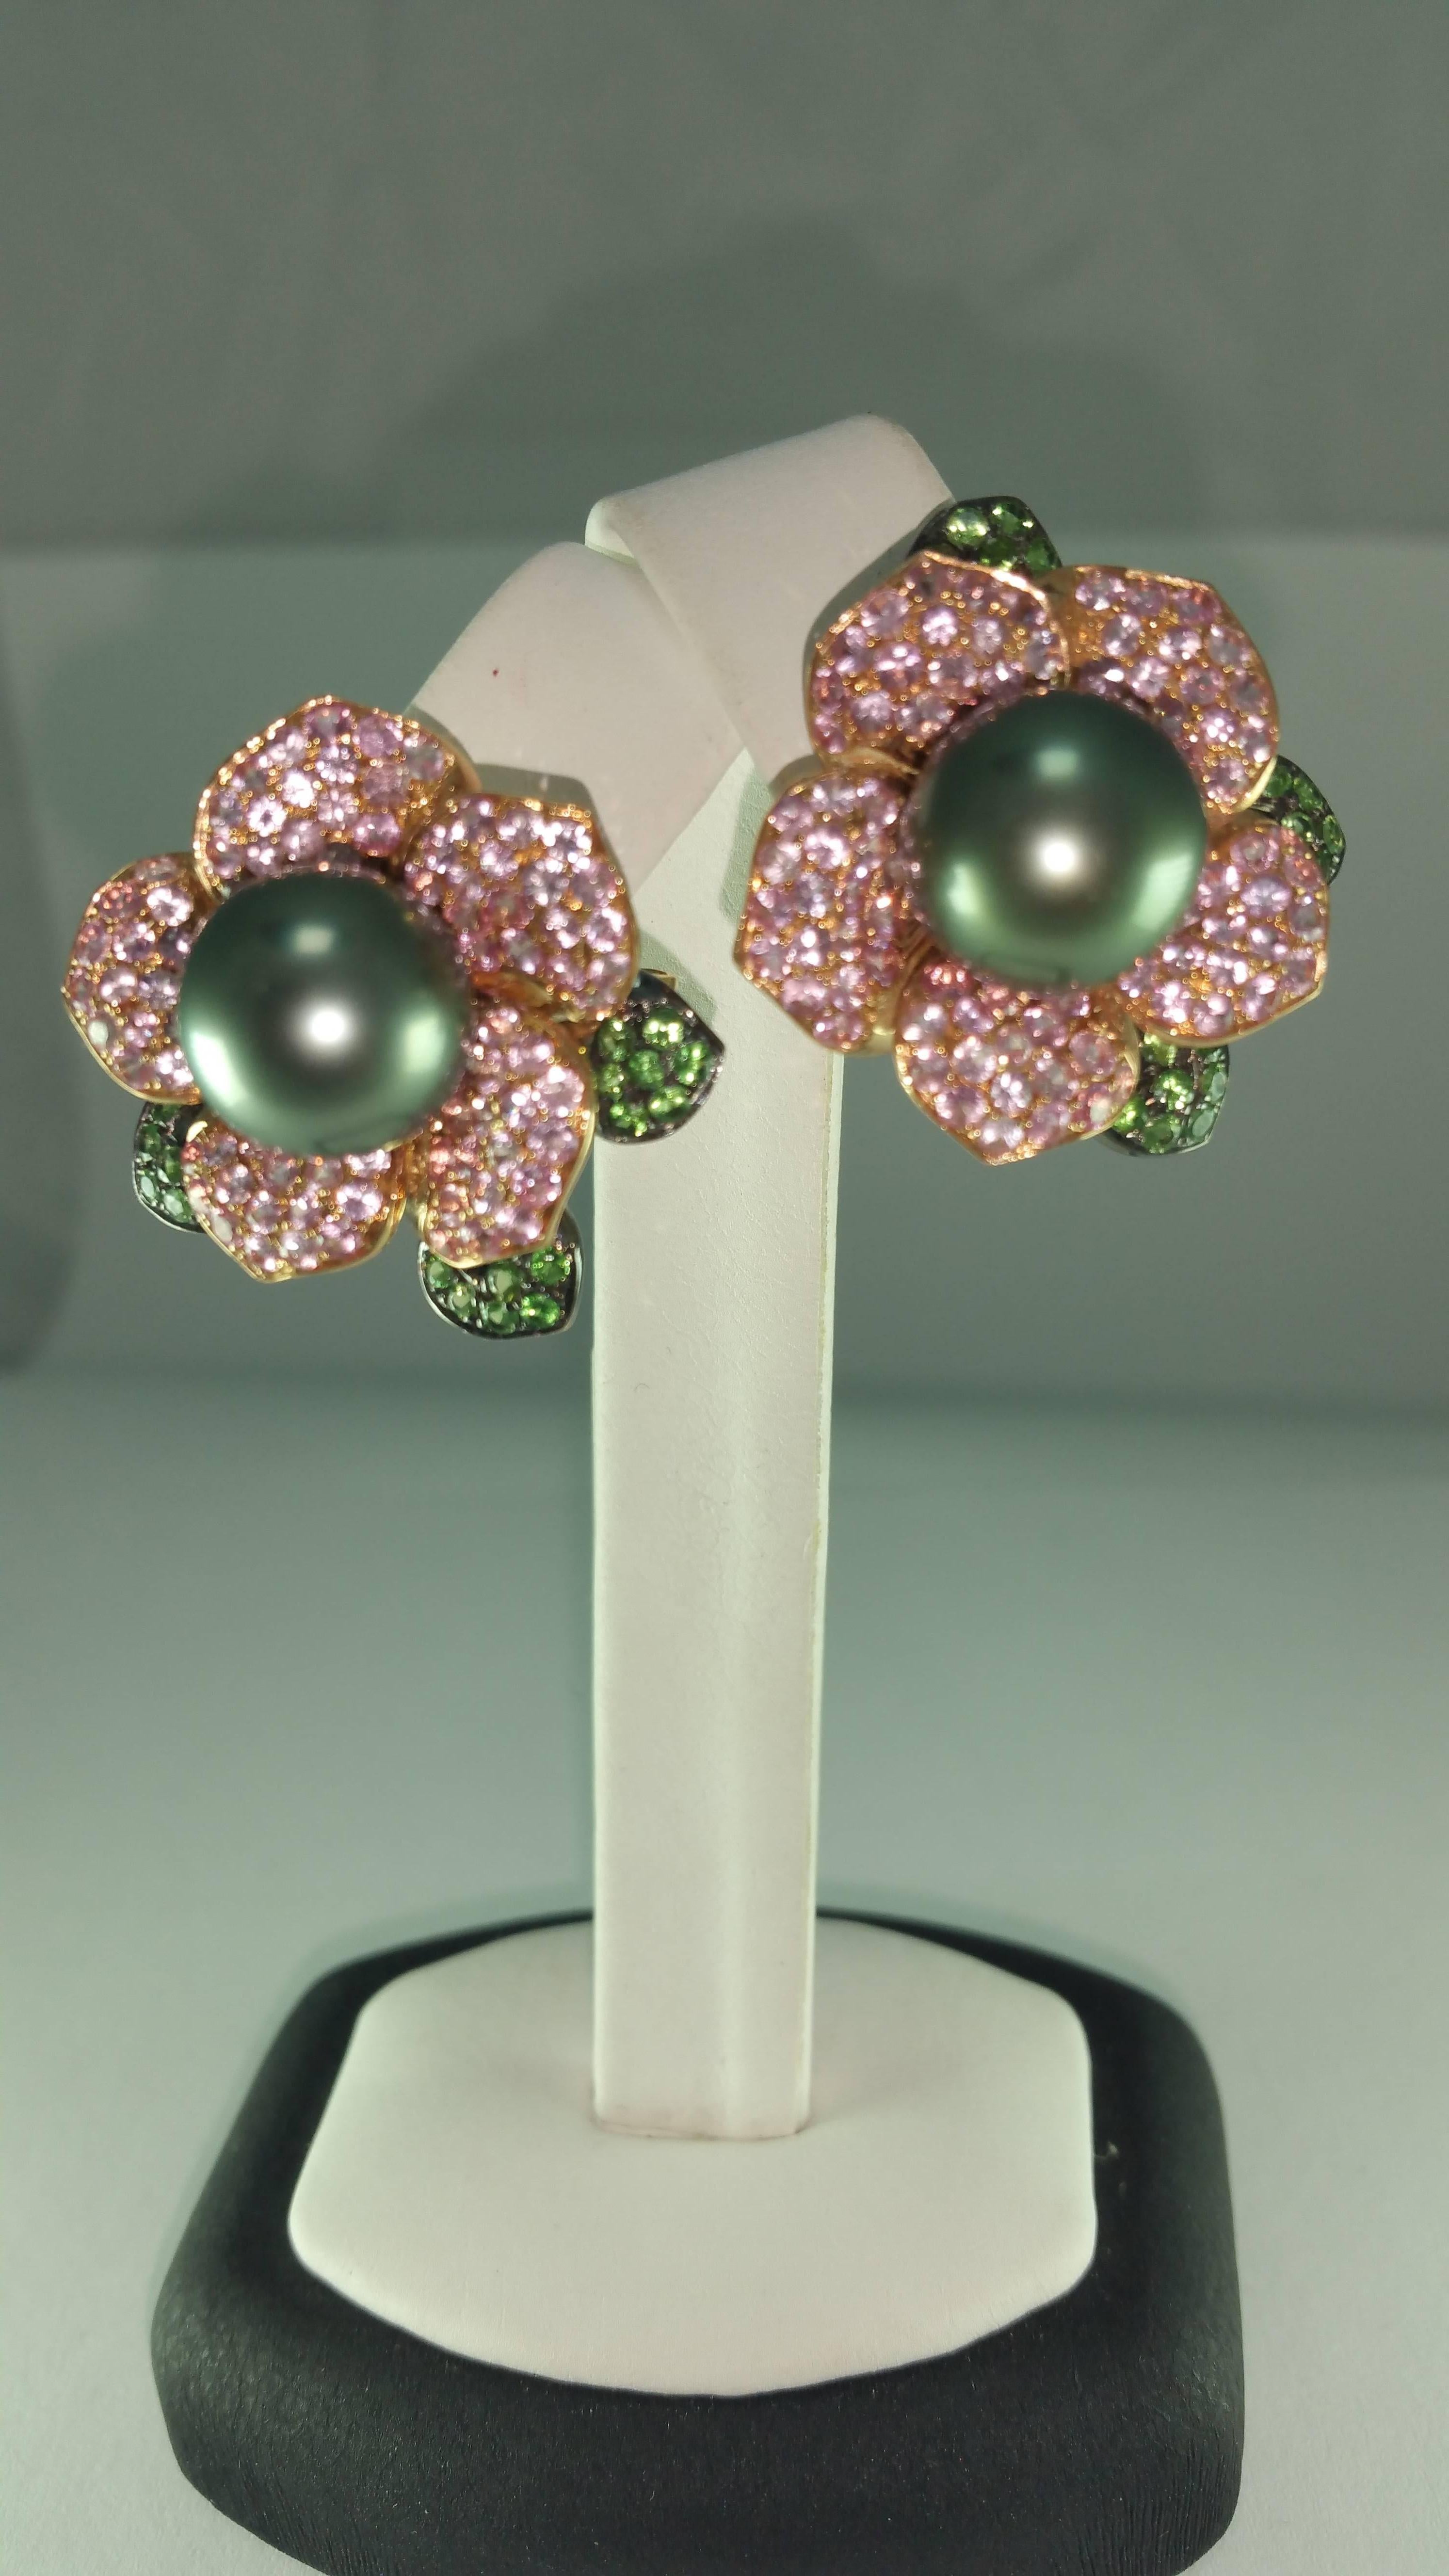 Tahitian Pearl Flower Diamond Gold Earrings
18 K Rose Gold
Pearl size: 11 - 11.5 mm
5.44 TW cts. Pink sapphire and Green Garnet
2.0 cm/ 2.5 cm 